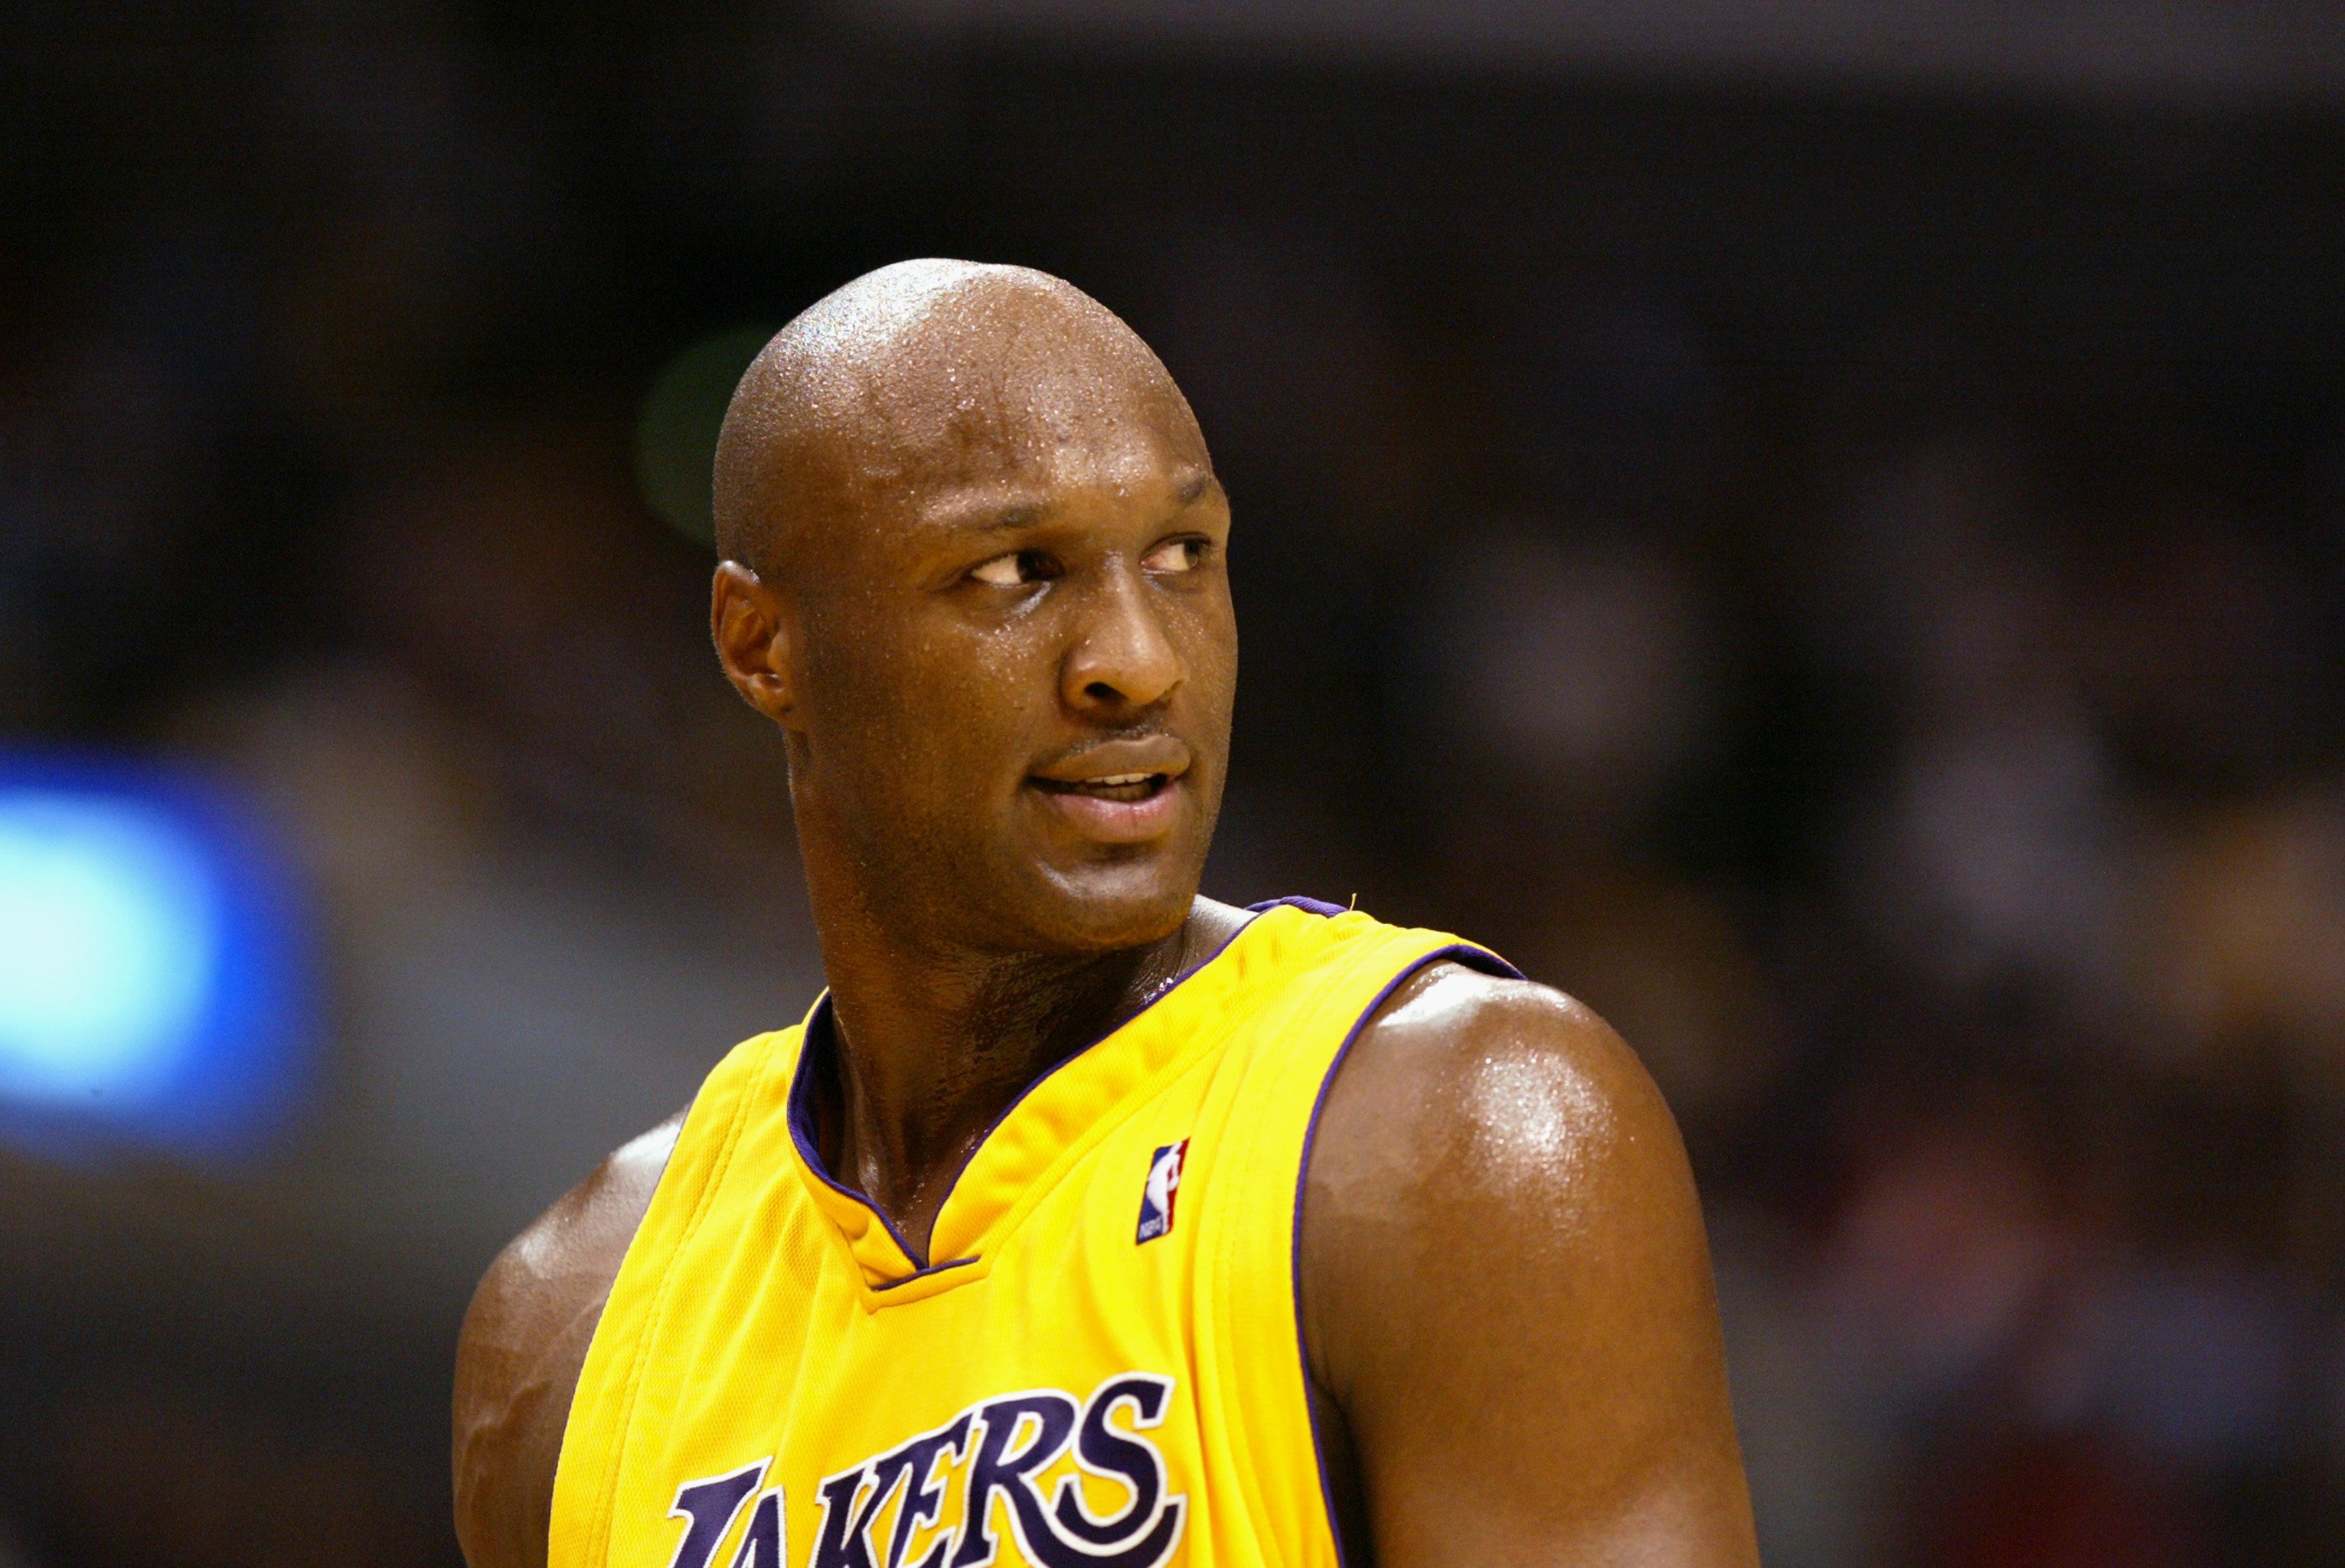 Lamar Odom during a Los Angeles Lakers game against the Denver Nuggets on Nov. 2, 2004 in California | Photo: Getty Images